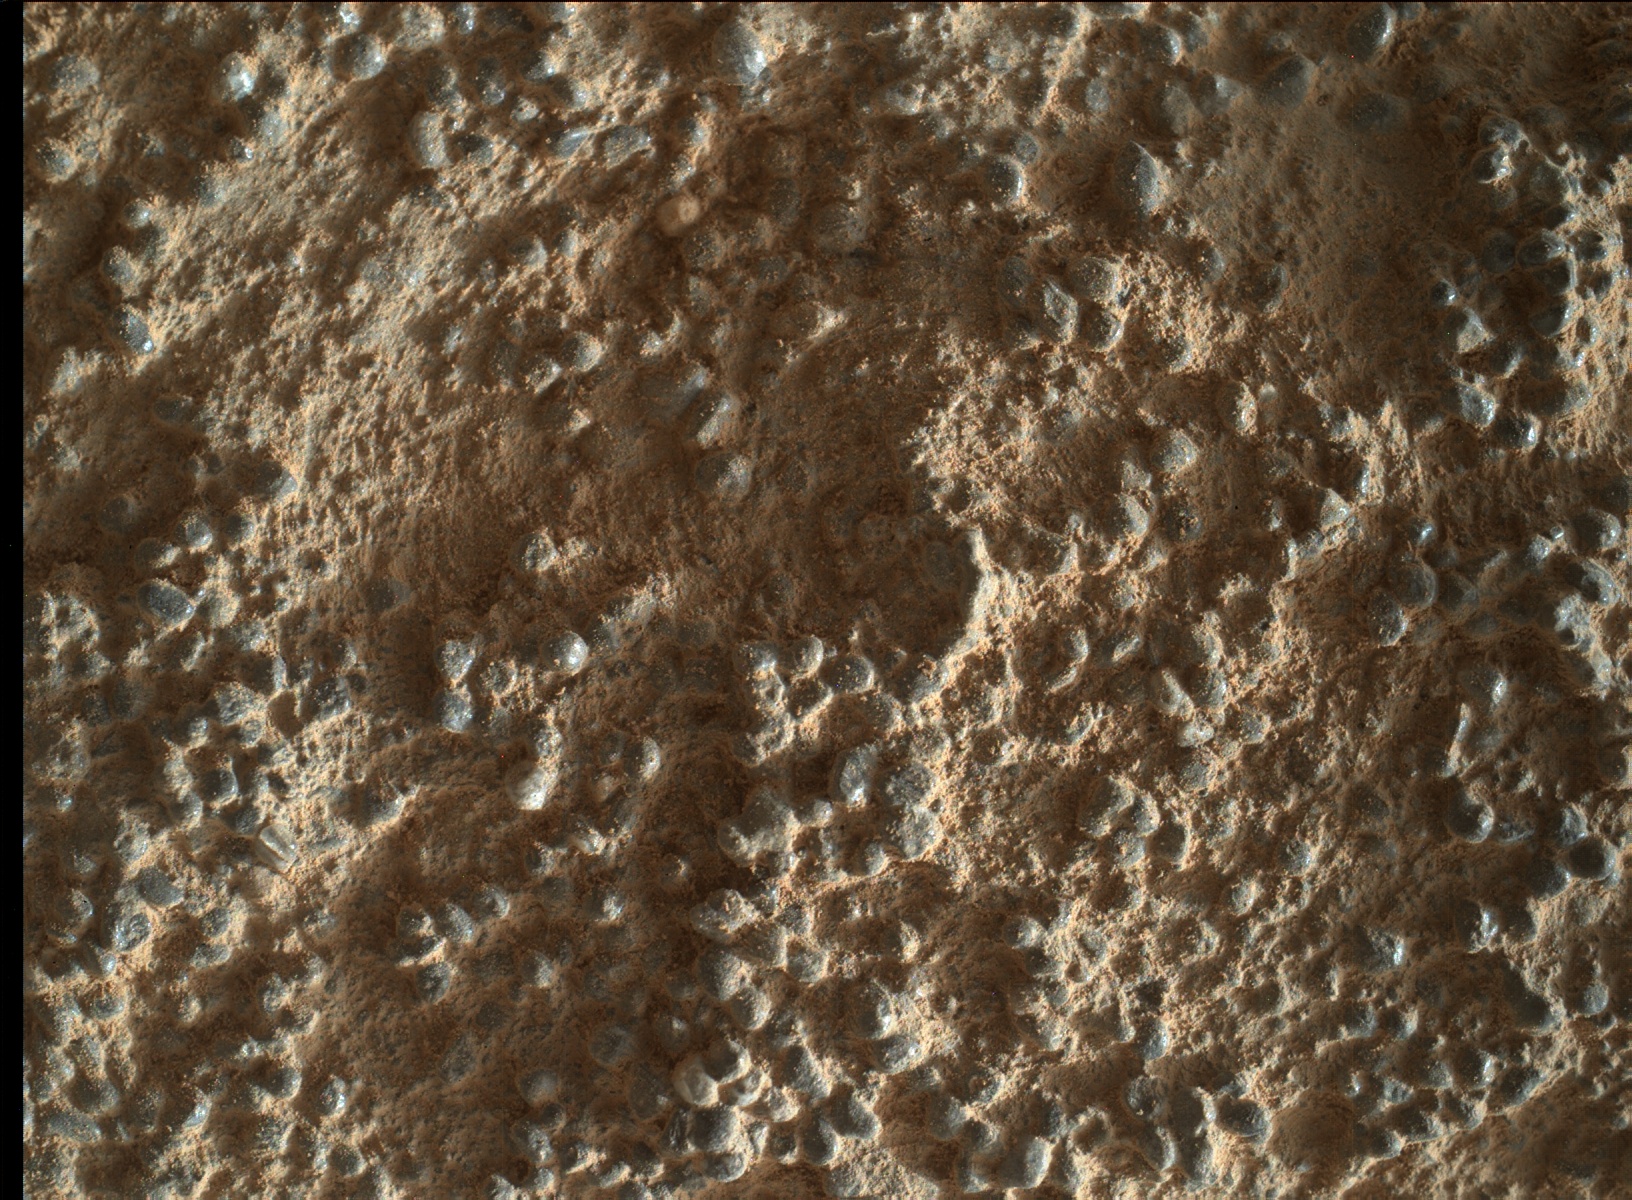 Nasa's Mars rover Curiosity acquired this image using its Mars Hand Lens Imager (MAHLI) on Sol 1348